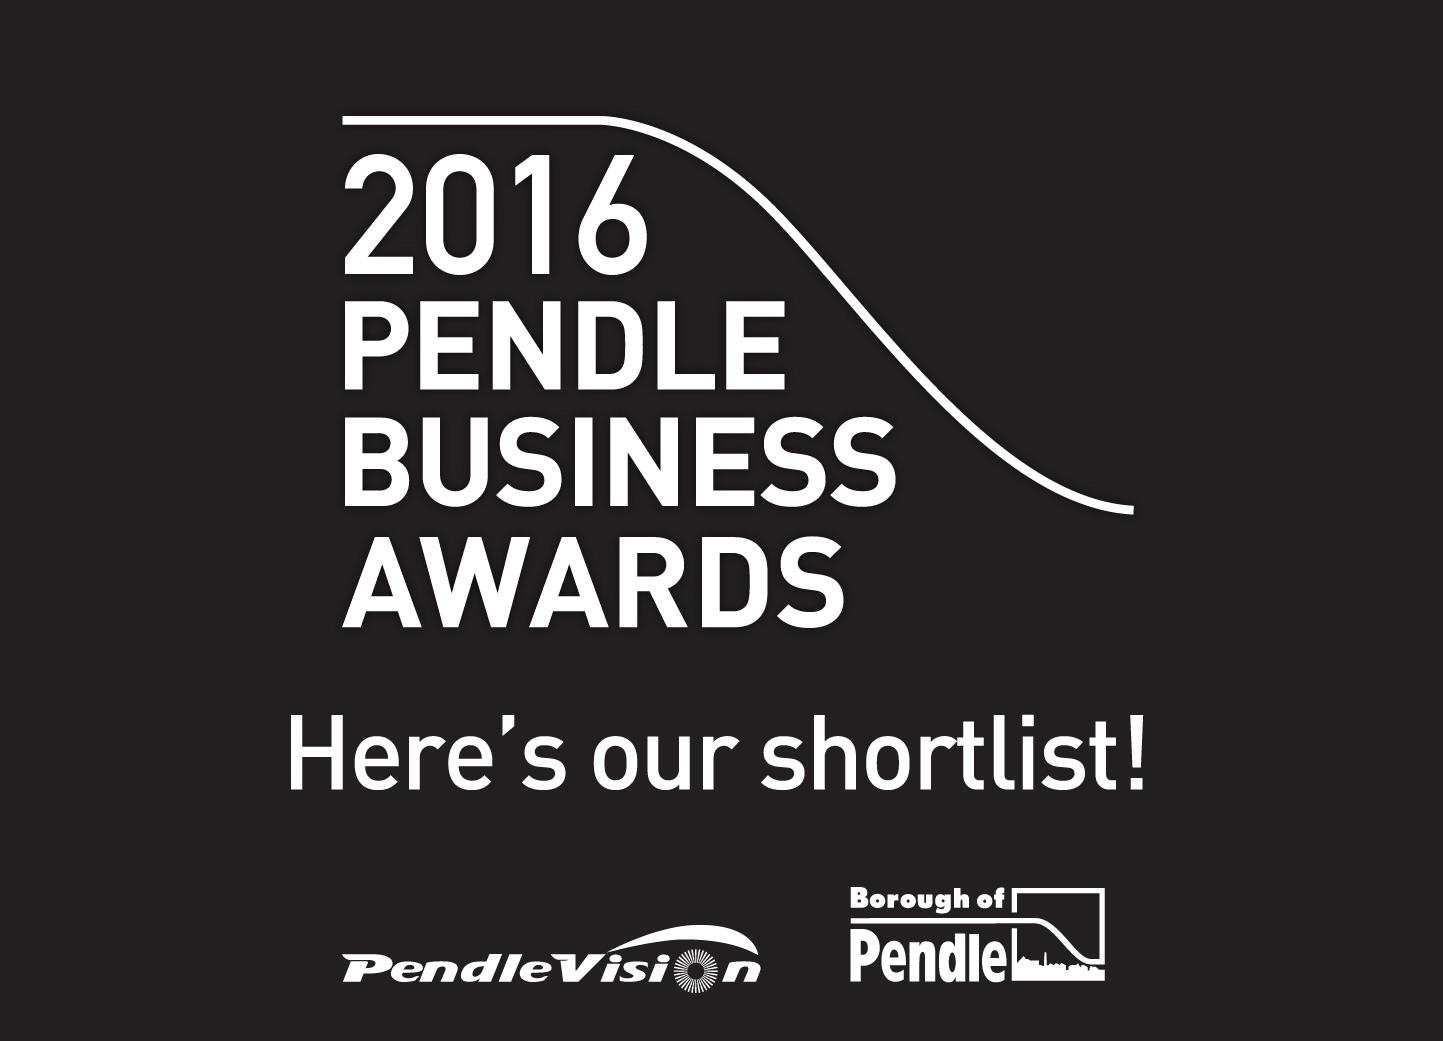 Pendle Business Awards - here's our shortlist!